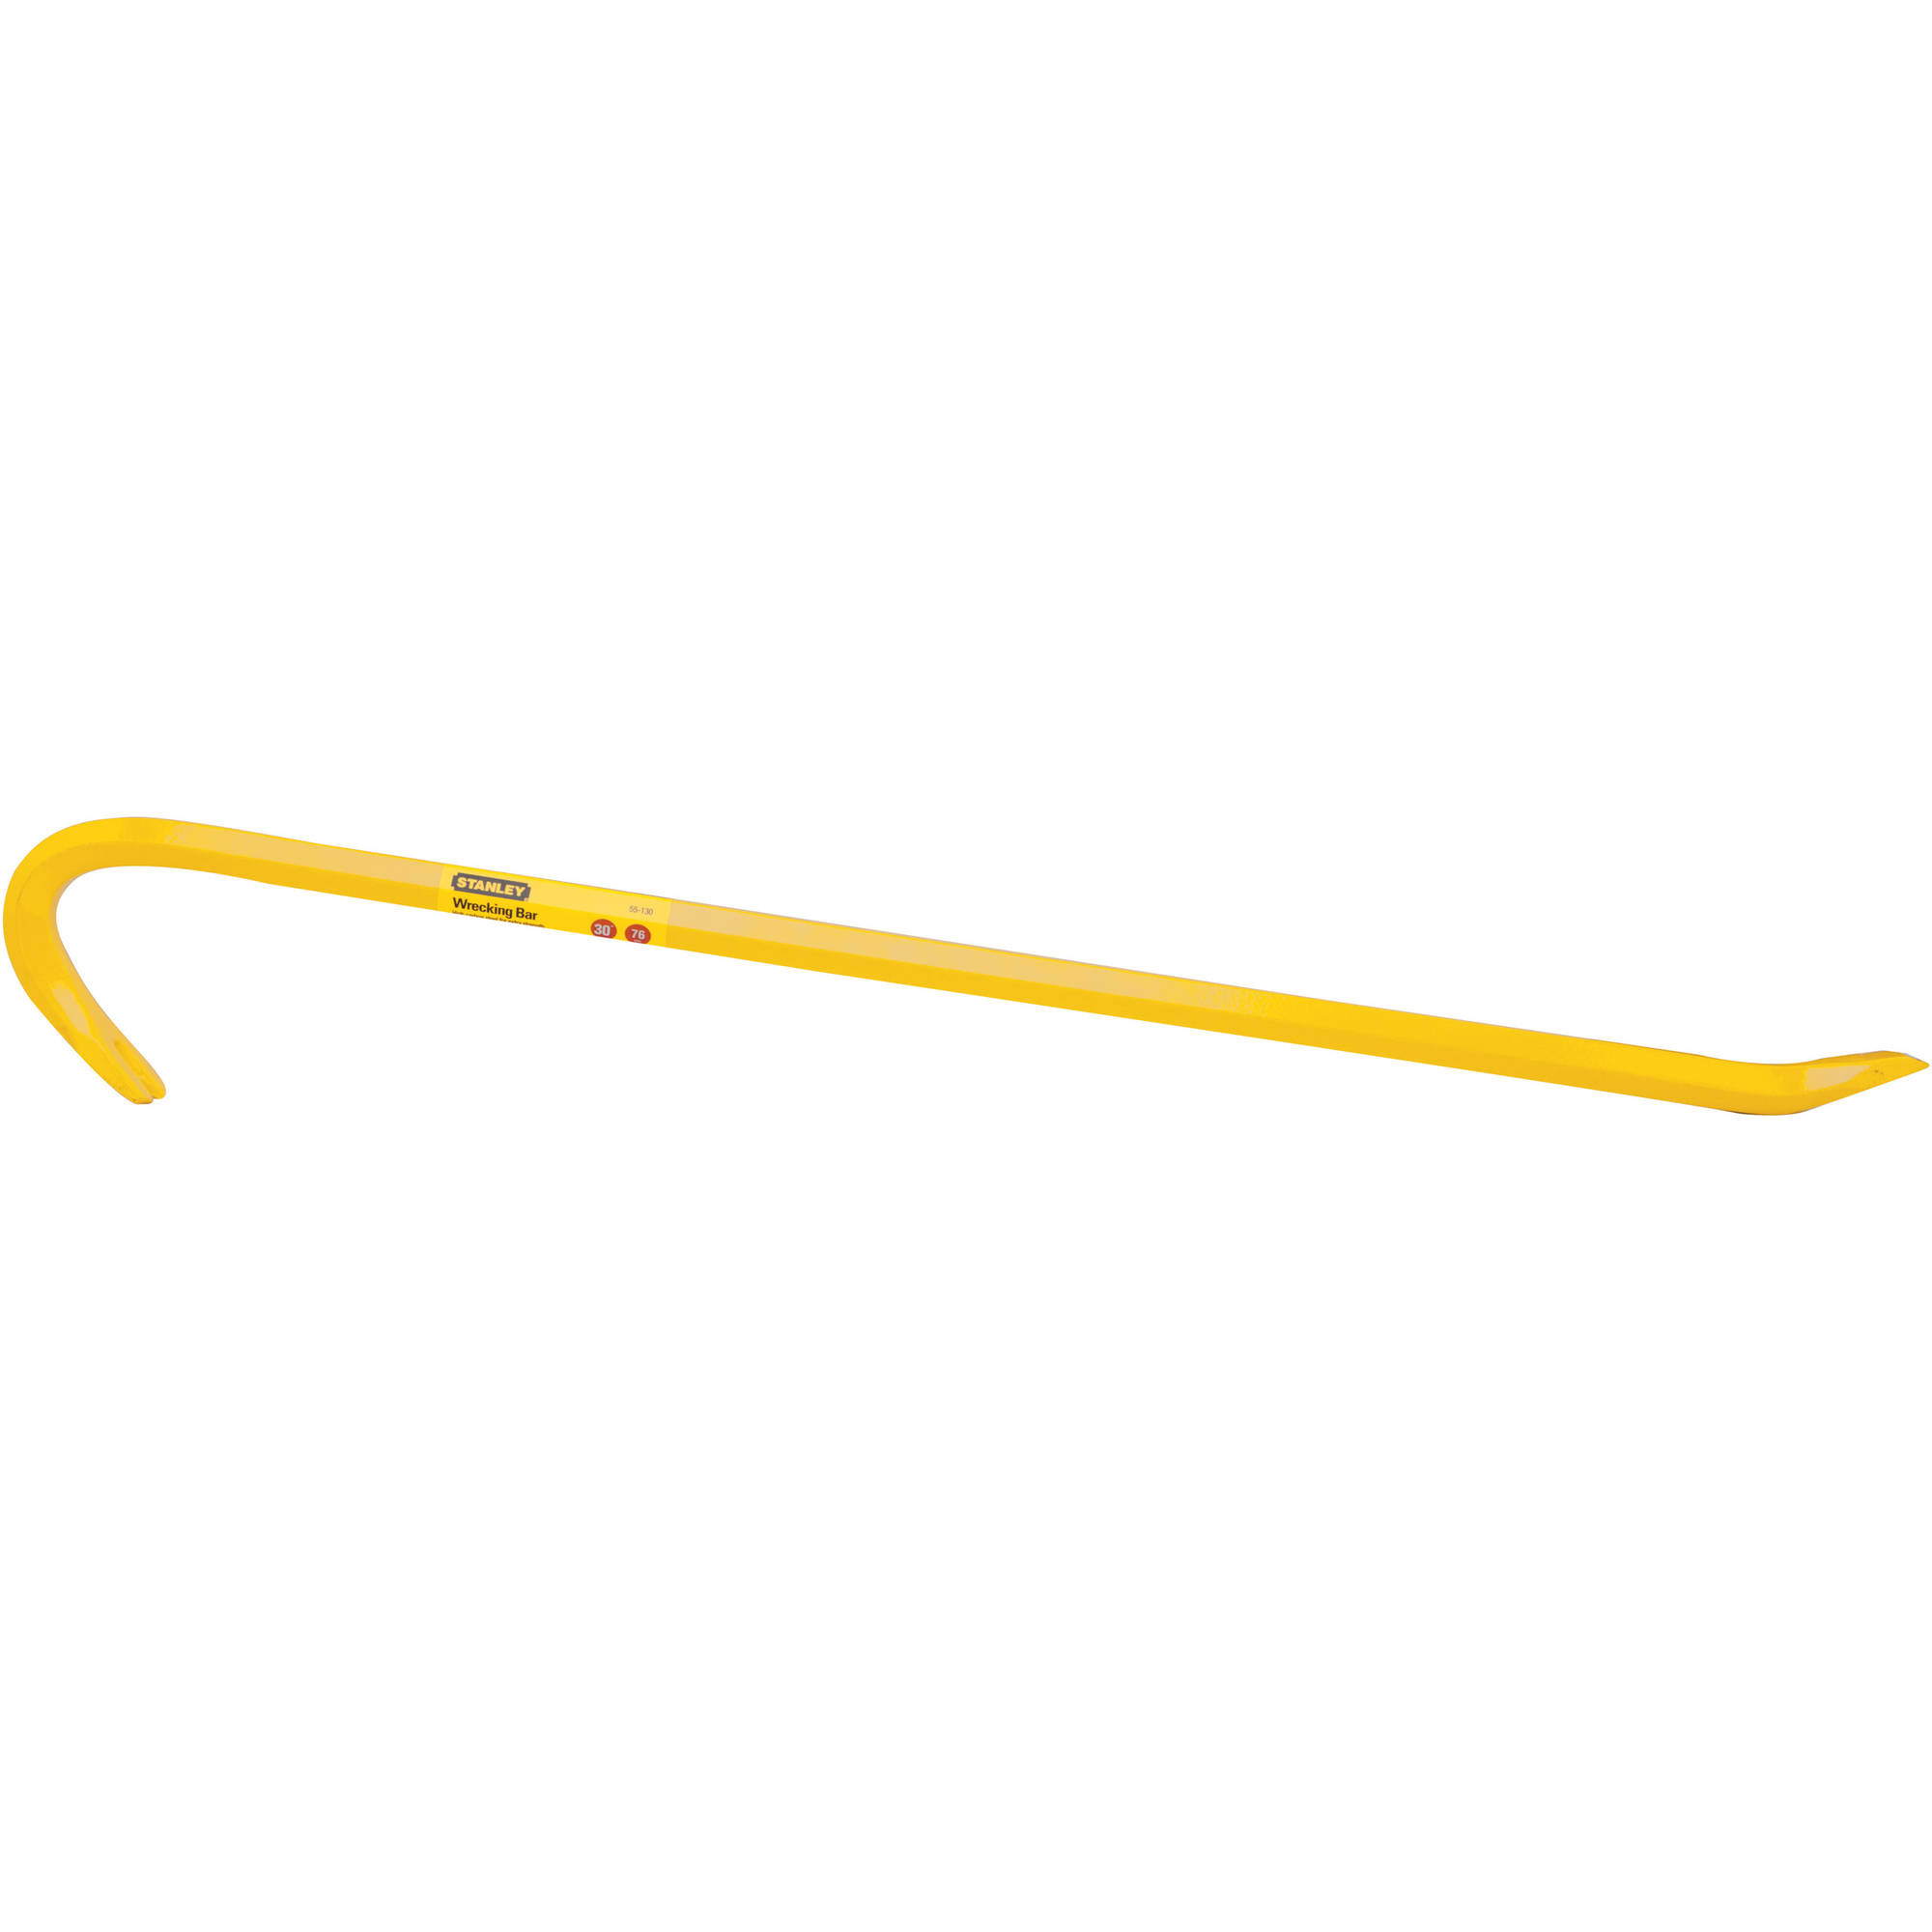 STANLEY 55-130 29-Inch Slotted Claw Ripping Bar - image 2 of 2